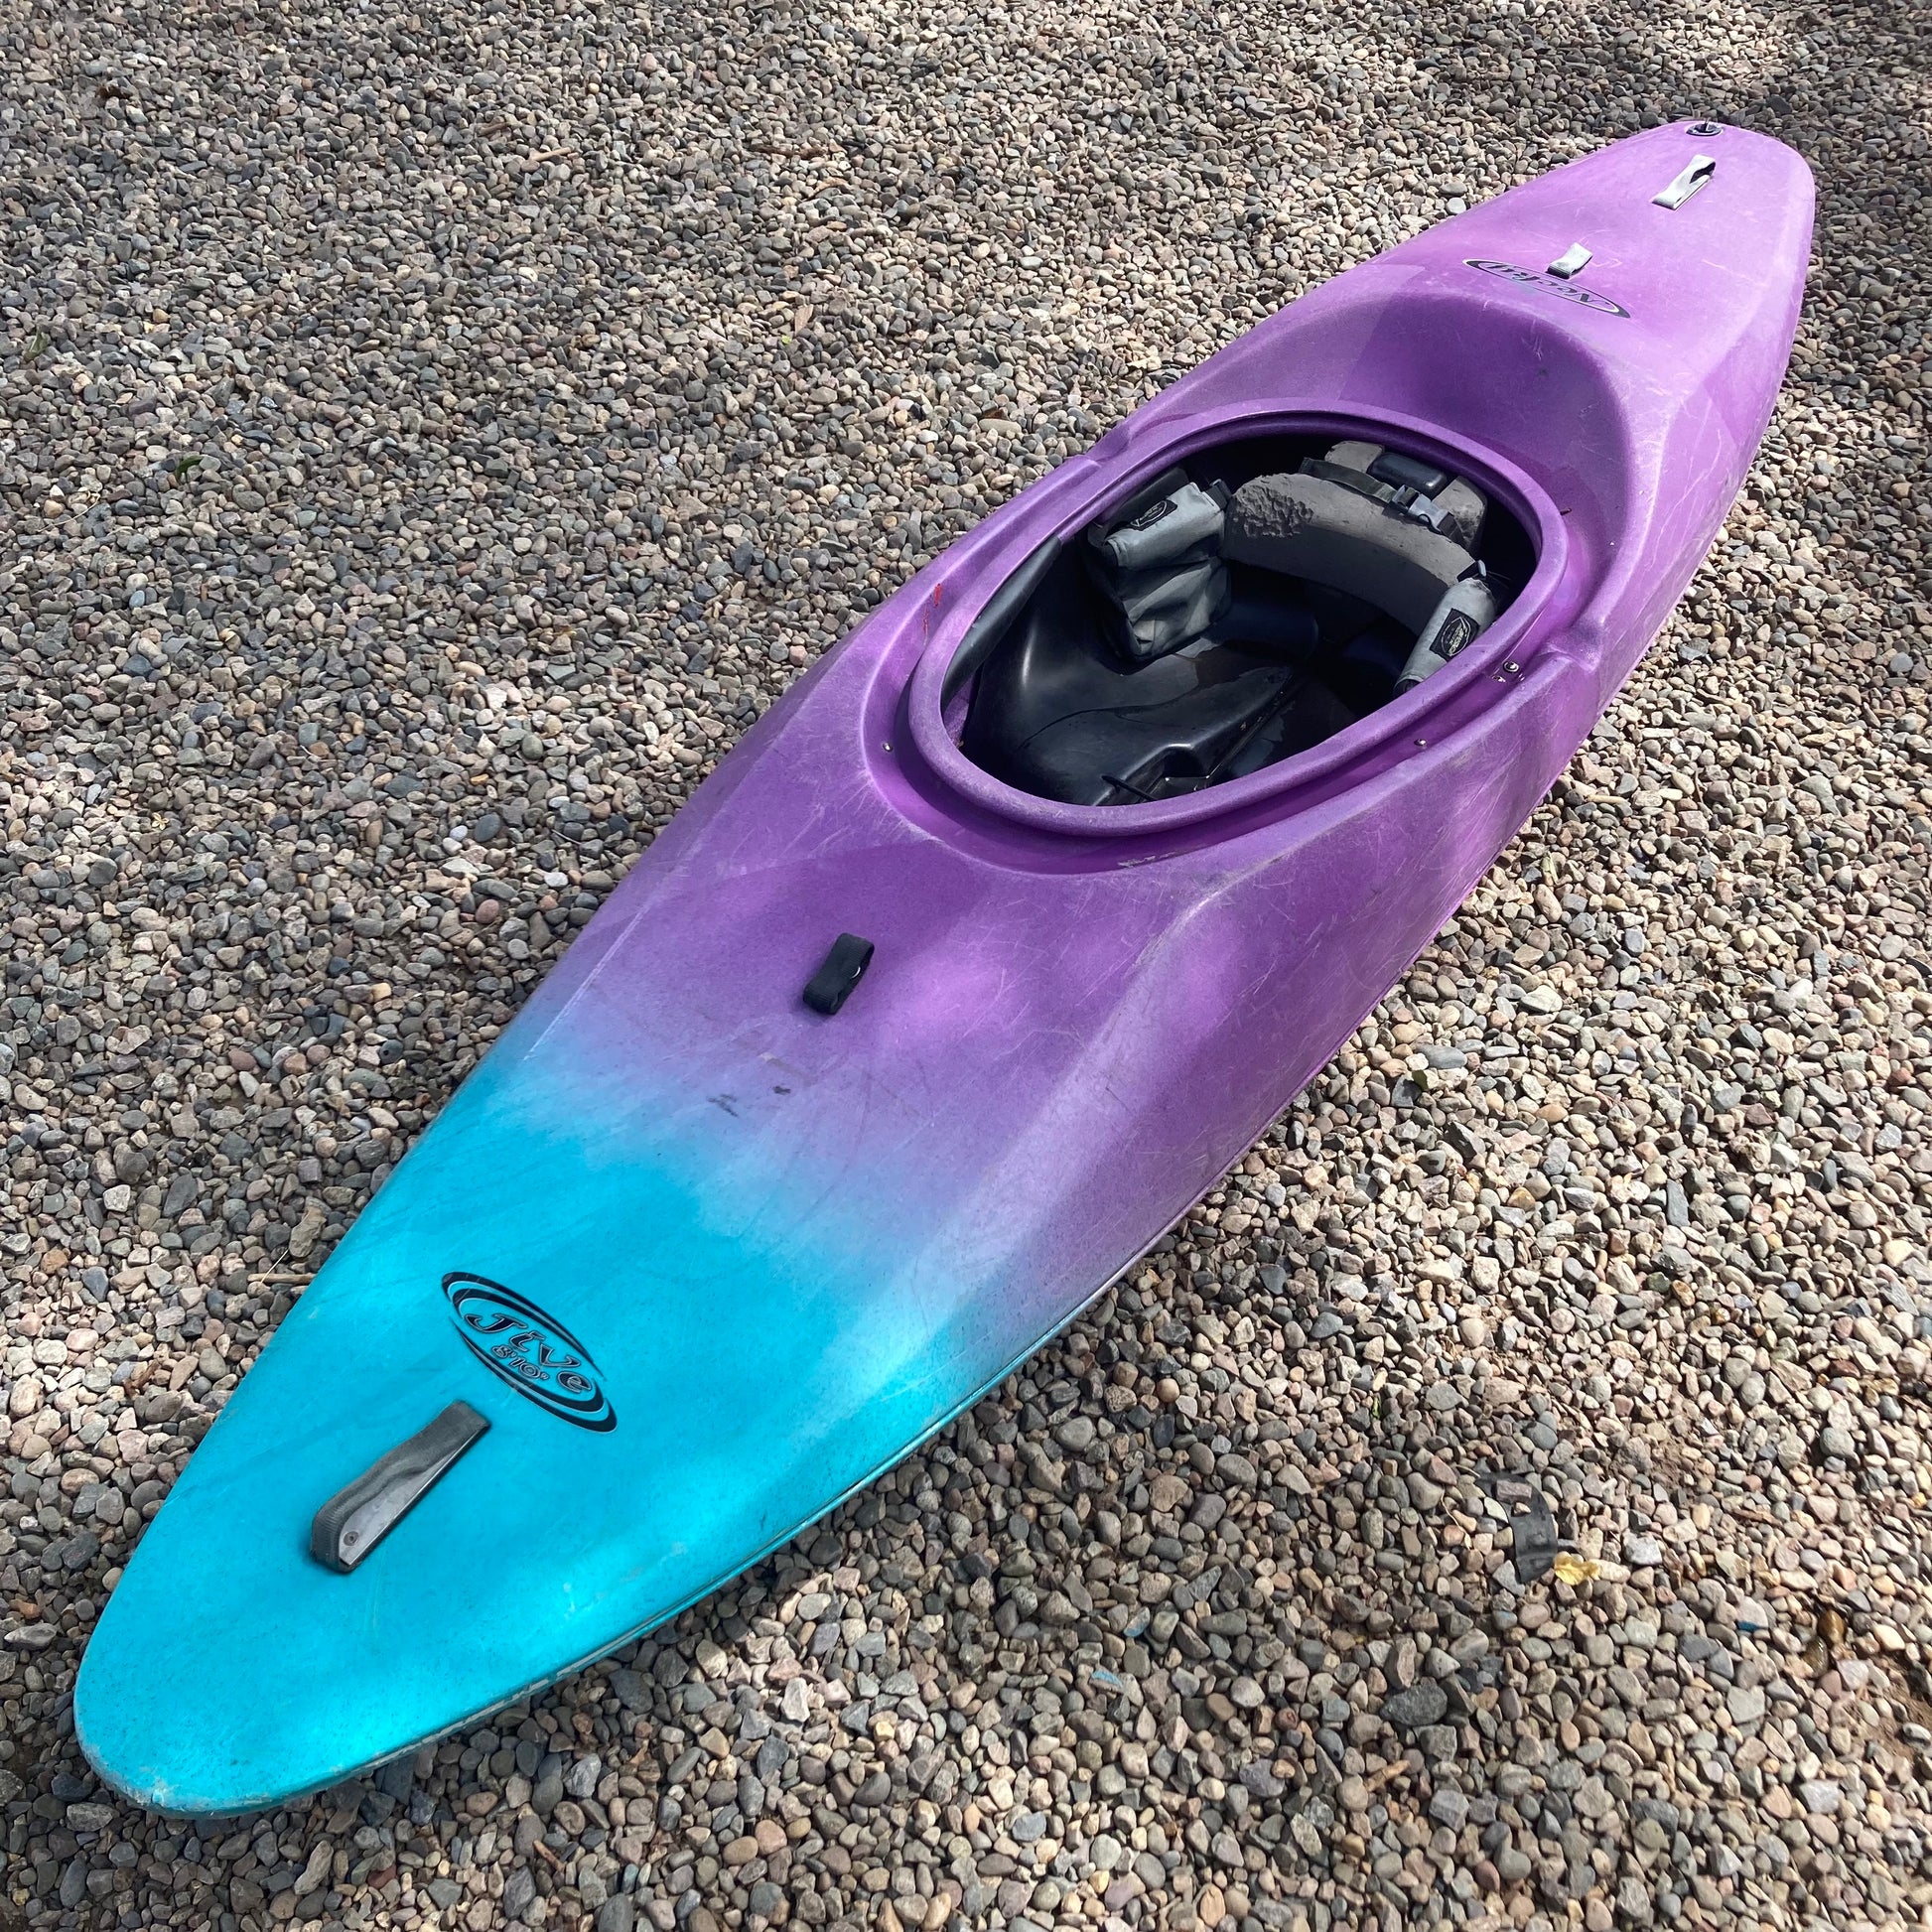 A Consignment Necky Jive kayak in purple and blue laying on gravel.